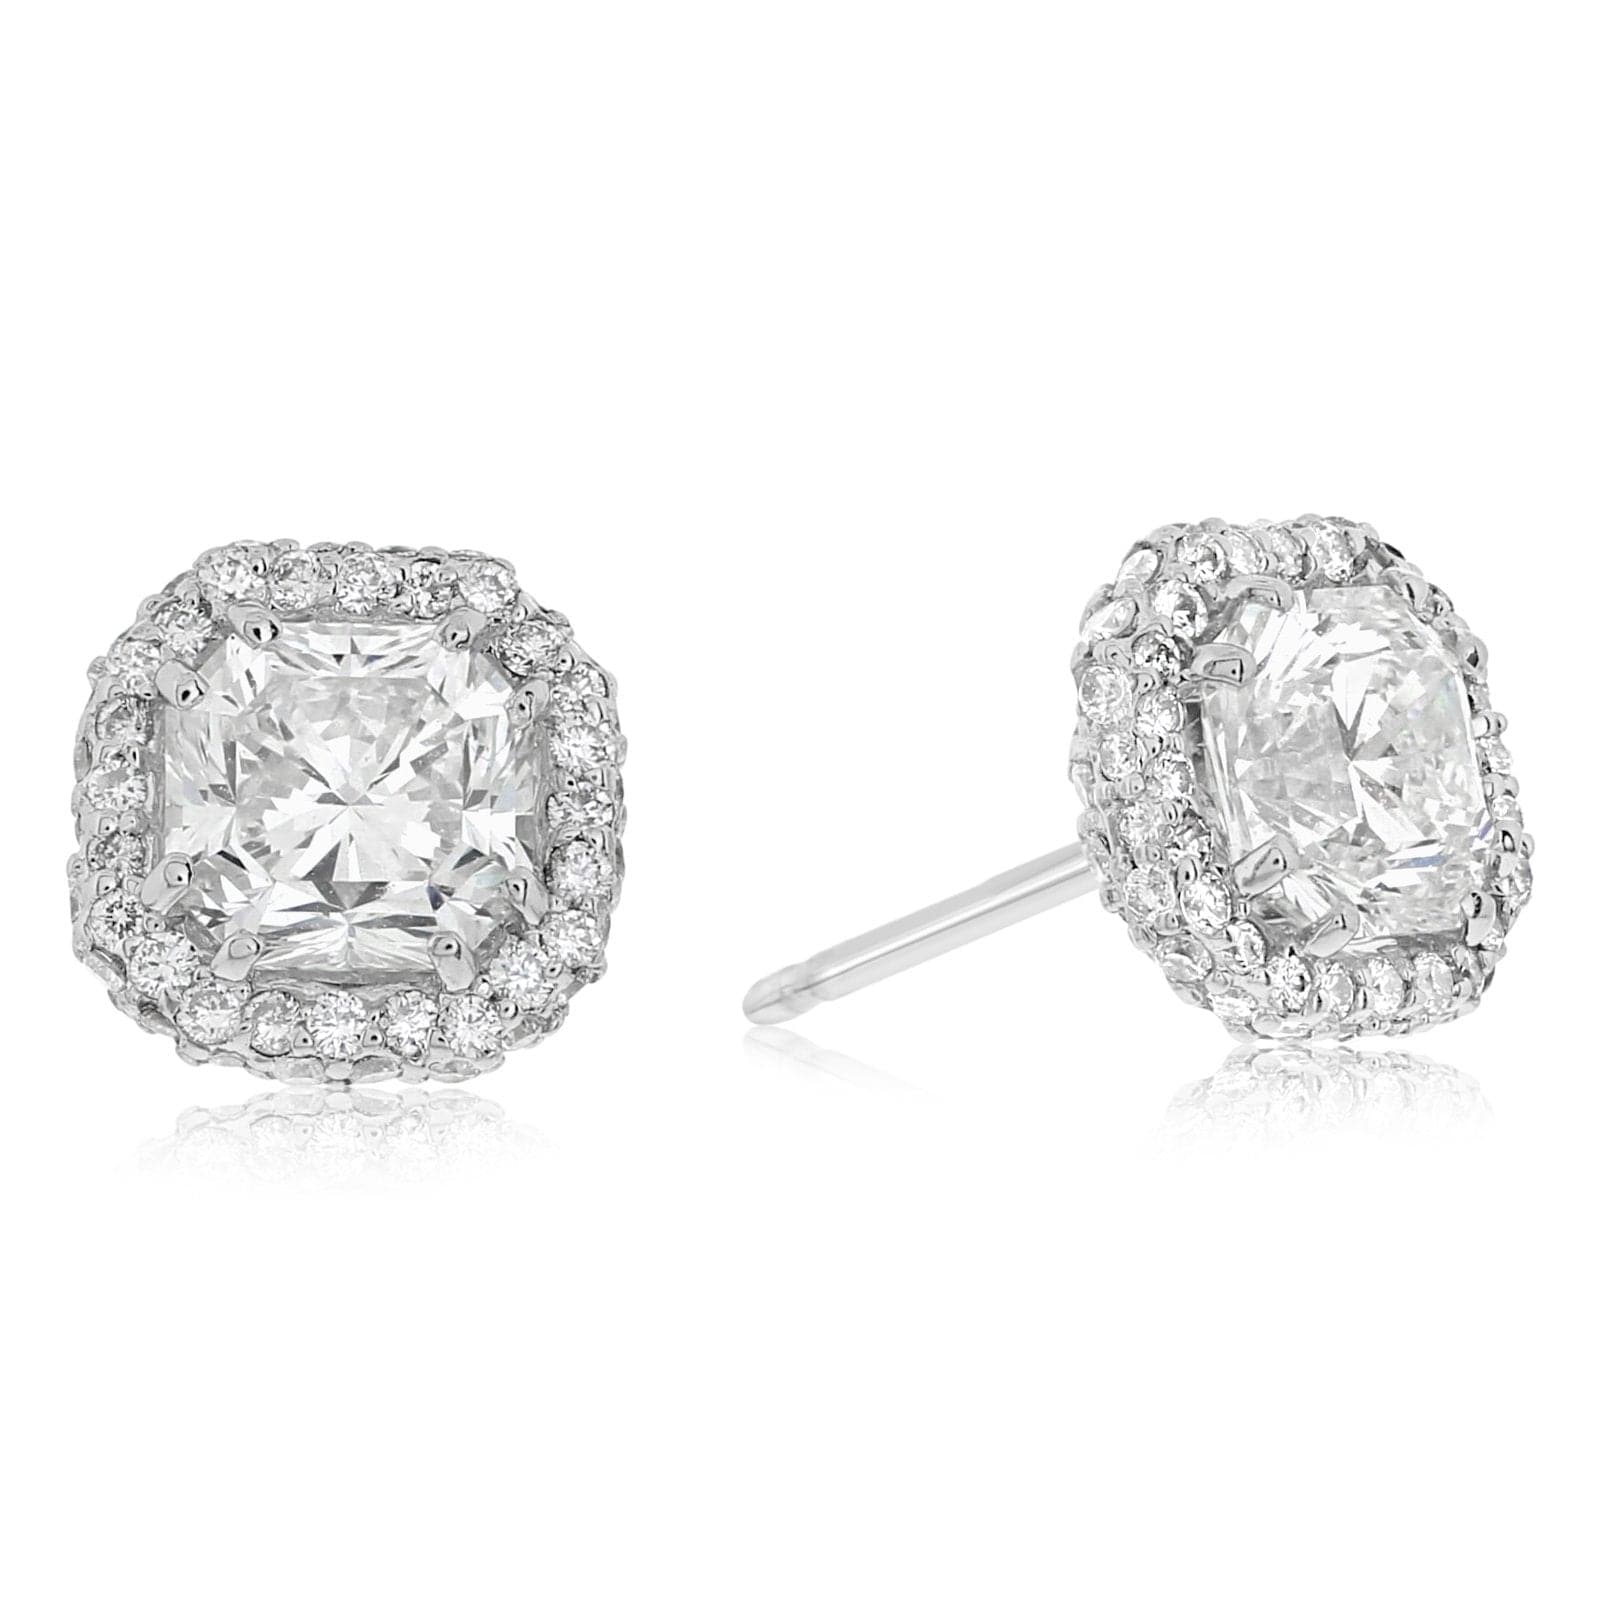 Certified 4ct. Diamond Stud Earrings 18k Gold over Italy Silver 